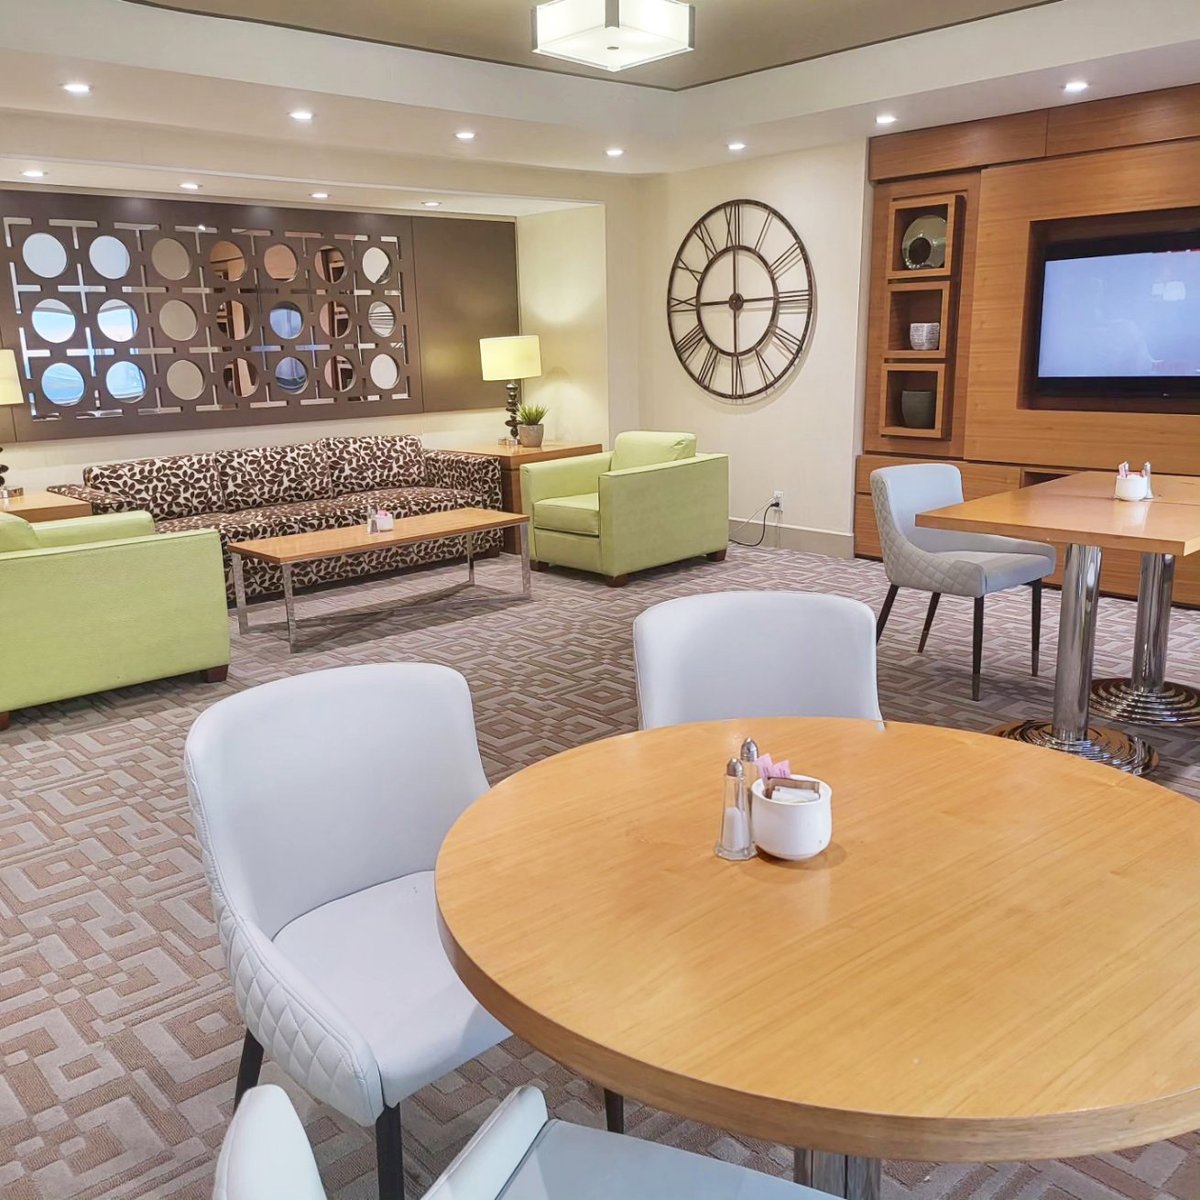 Upgrade your stay on the #ClubLevel at the @SheratonParkway with access to the #SheratonClubLounge including #breakfast and evening #horsdoeuvres. Reserve your stay at sheratonparkway.com